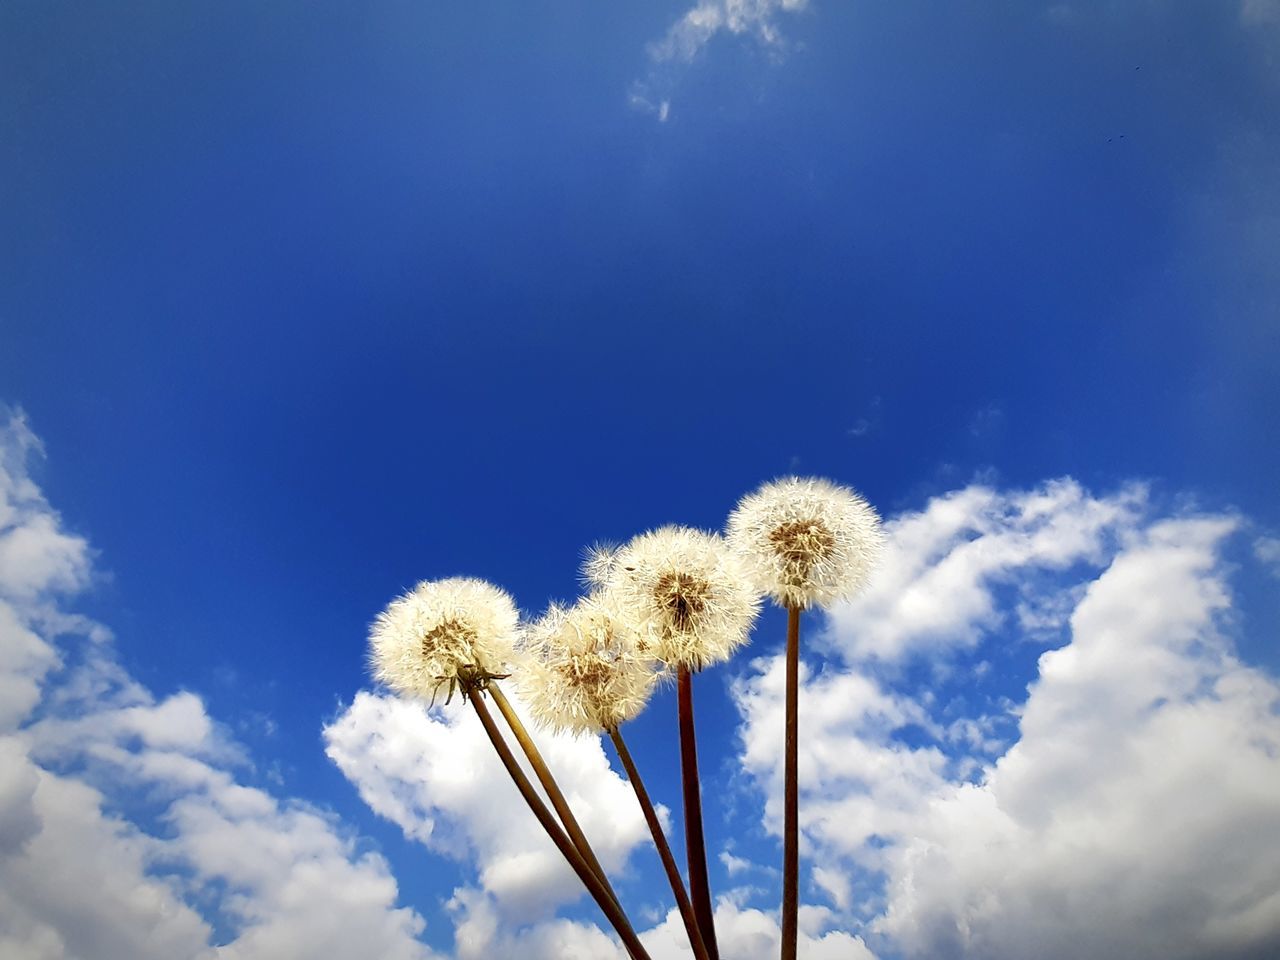 sky, cloud - sky, low angle view, plant, day, flower, nature, blue, beauty in nature, dandelion, no people, freshness, fragility, flowering plant, vulnerability, growth, sunlight, outdoors, tranquility, close-up, flower head, softness, dandelion seed